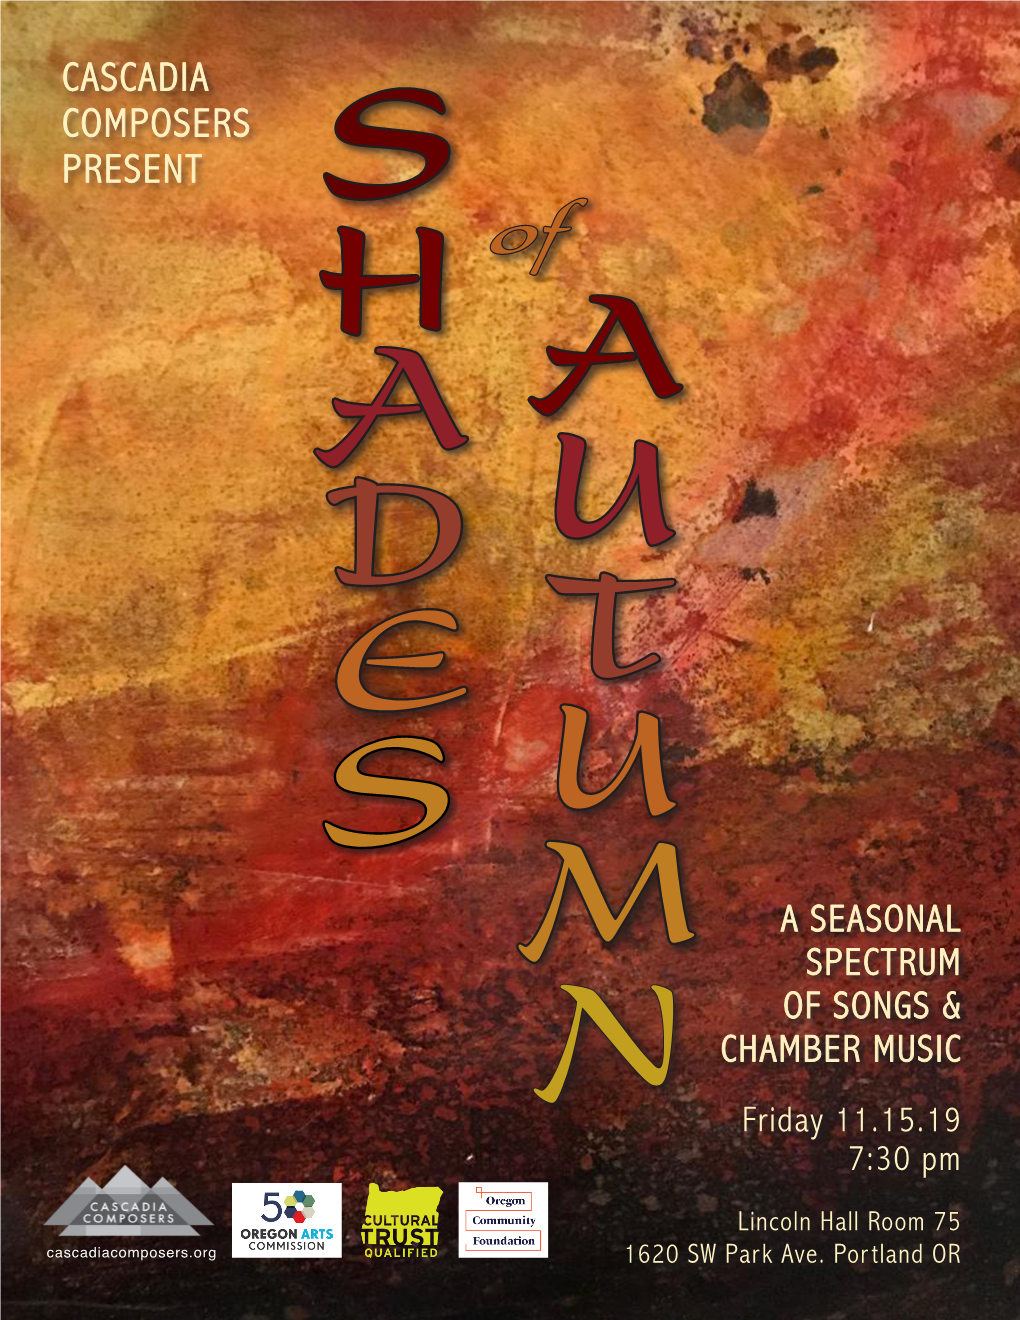 CASCADIA COMPOSERS PRESENT S H of a a D U E T S U a SEASONAL M SPECTRUM of SONGS & N CHAMBER MUSIC Friday 11.15.19 7:30 Pm